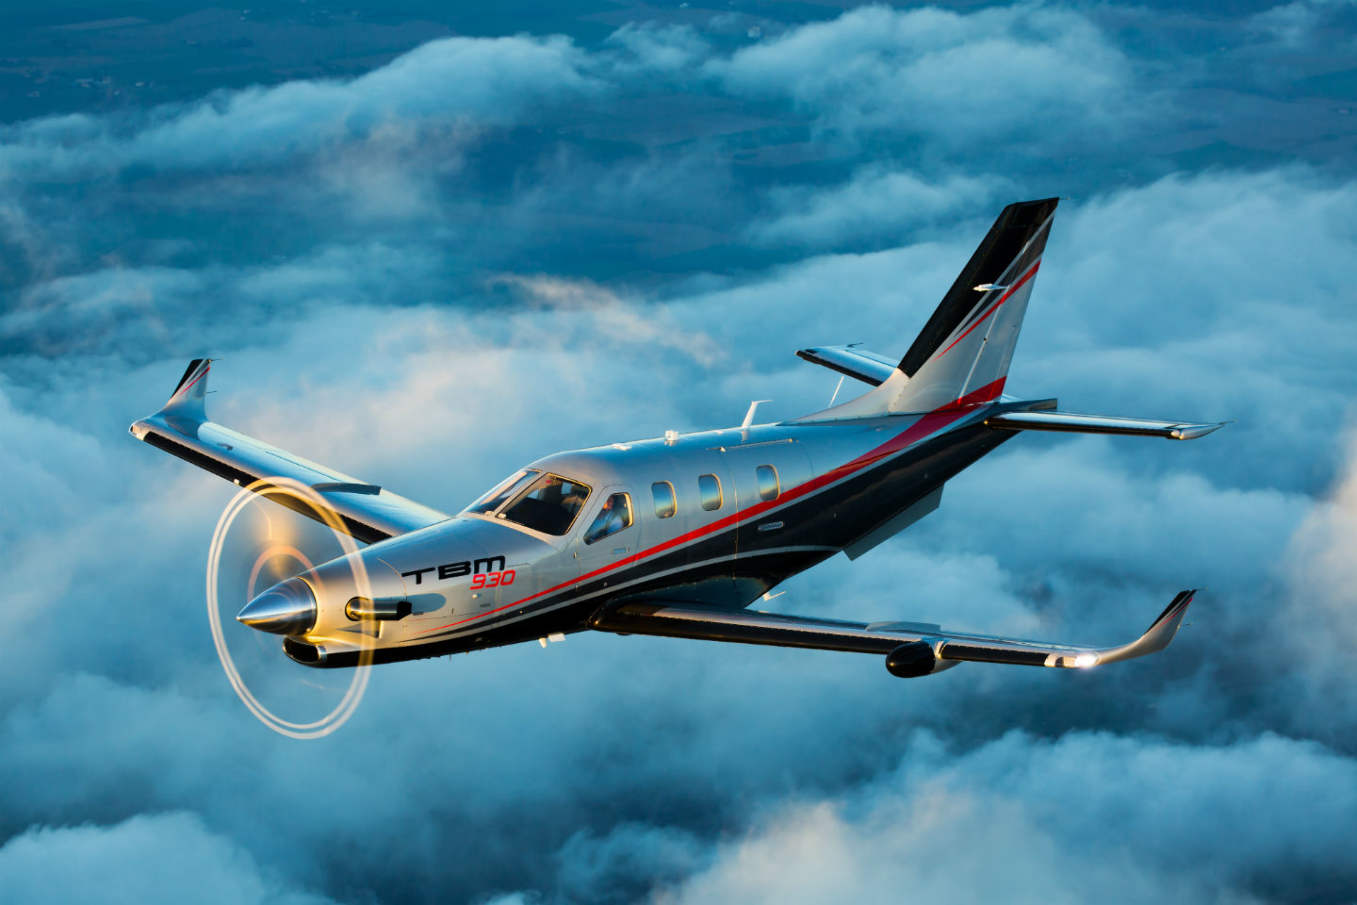 Daher delivers first TBM 930 Model Year 2017 aircraft